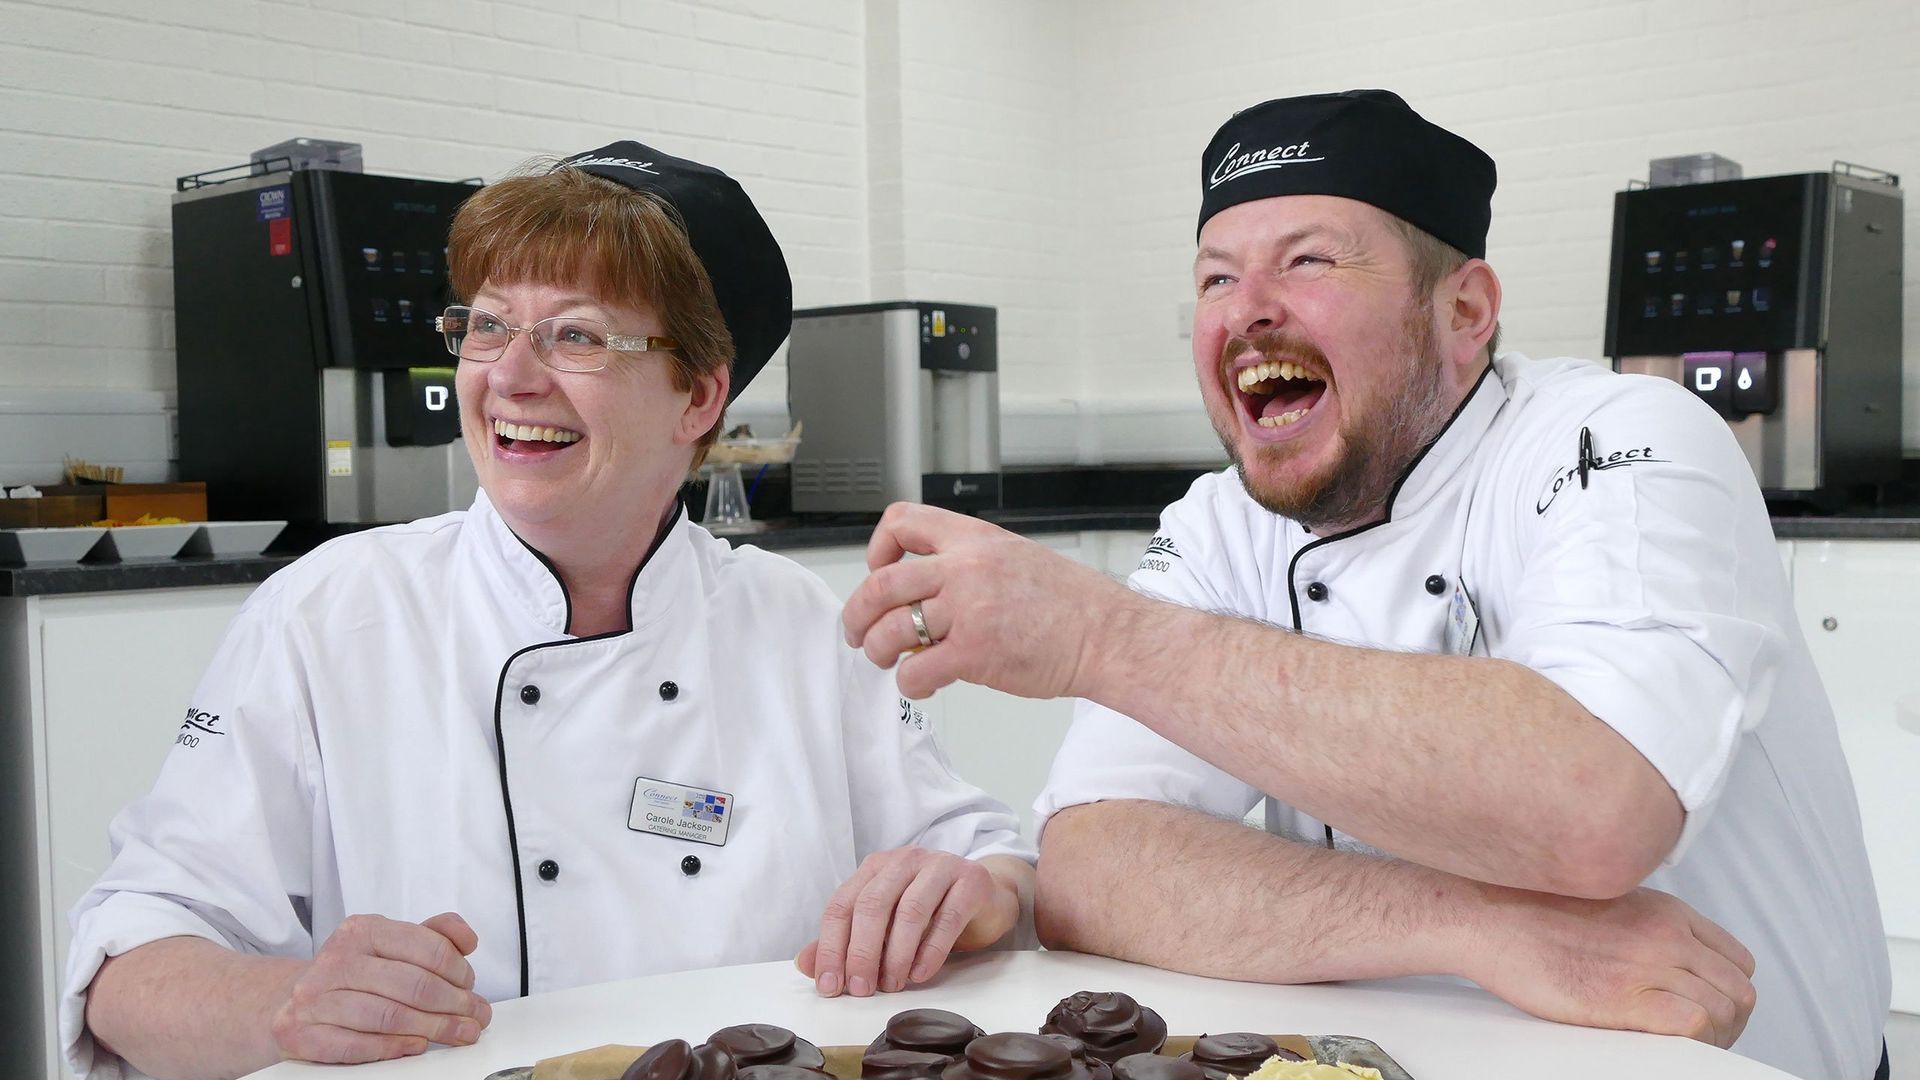 Chefs laughing - Contract Catering For Business and Industry Head Image